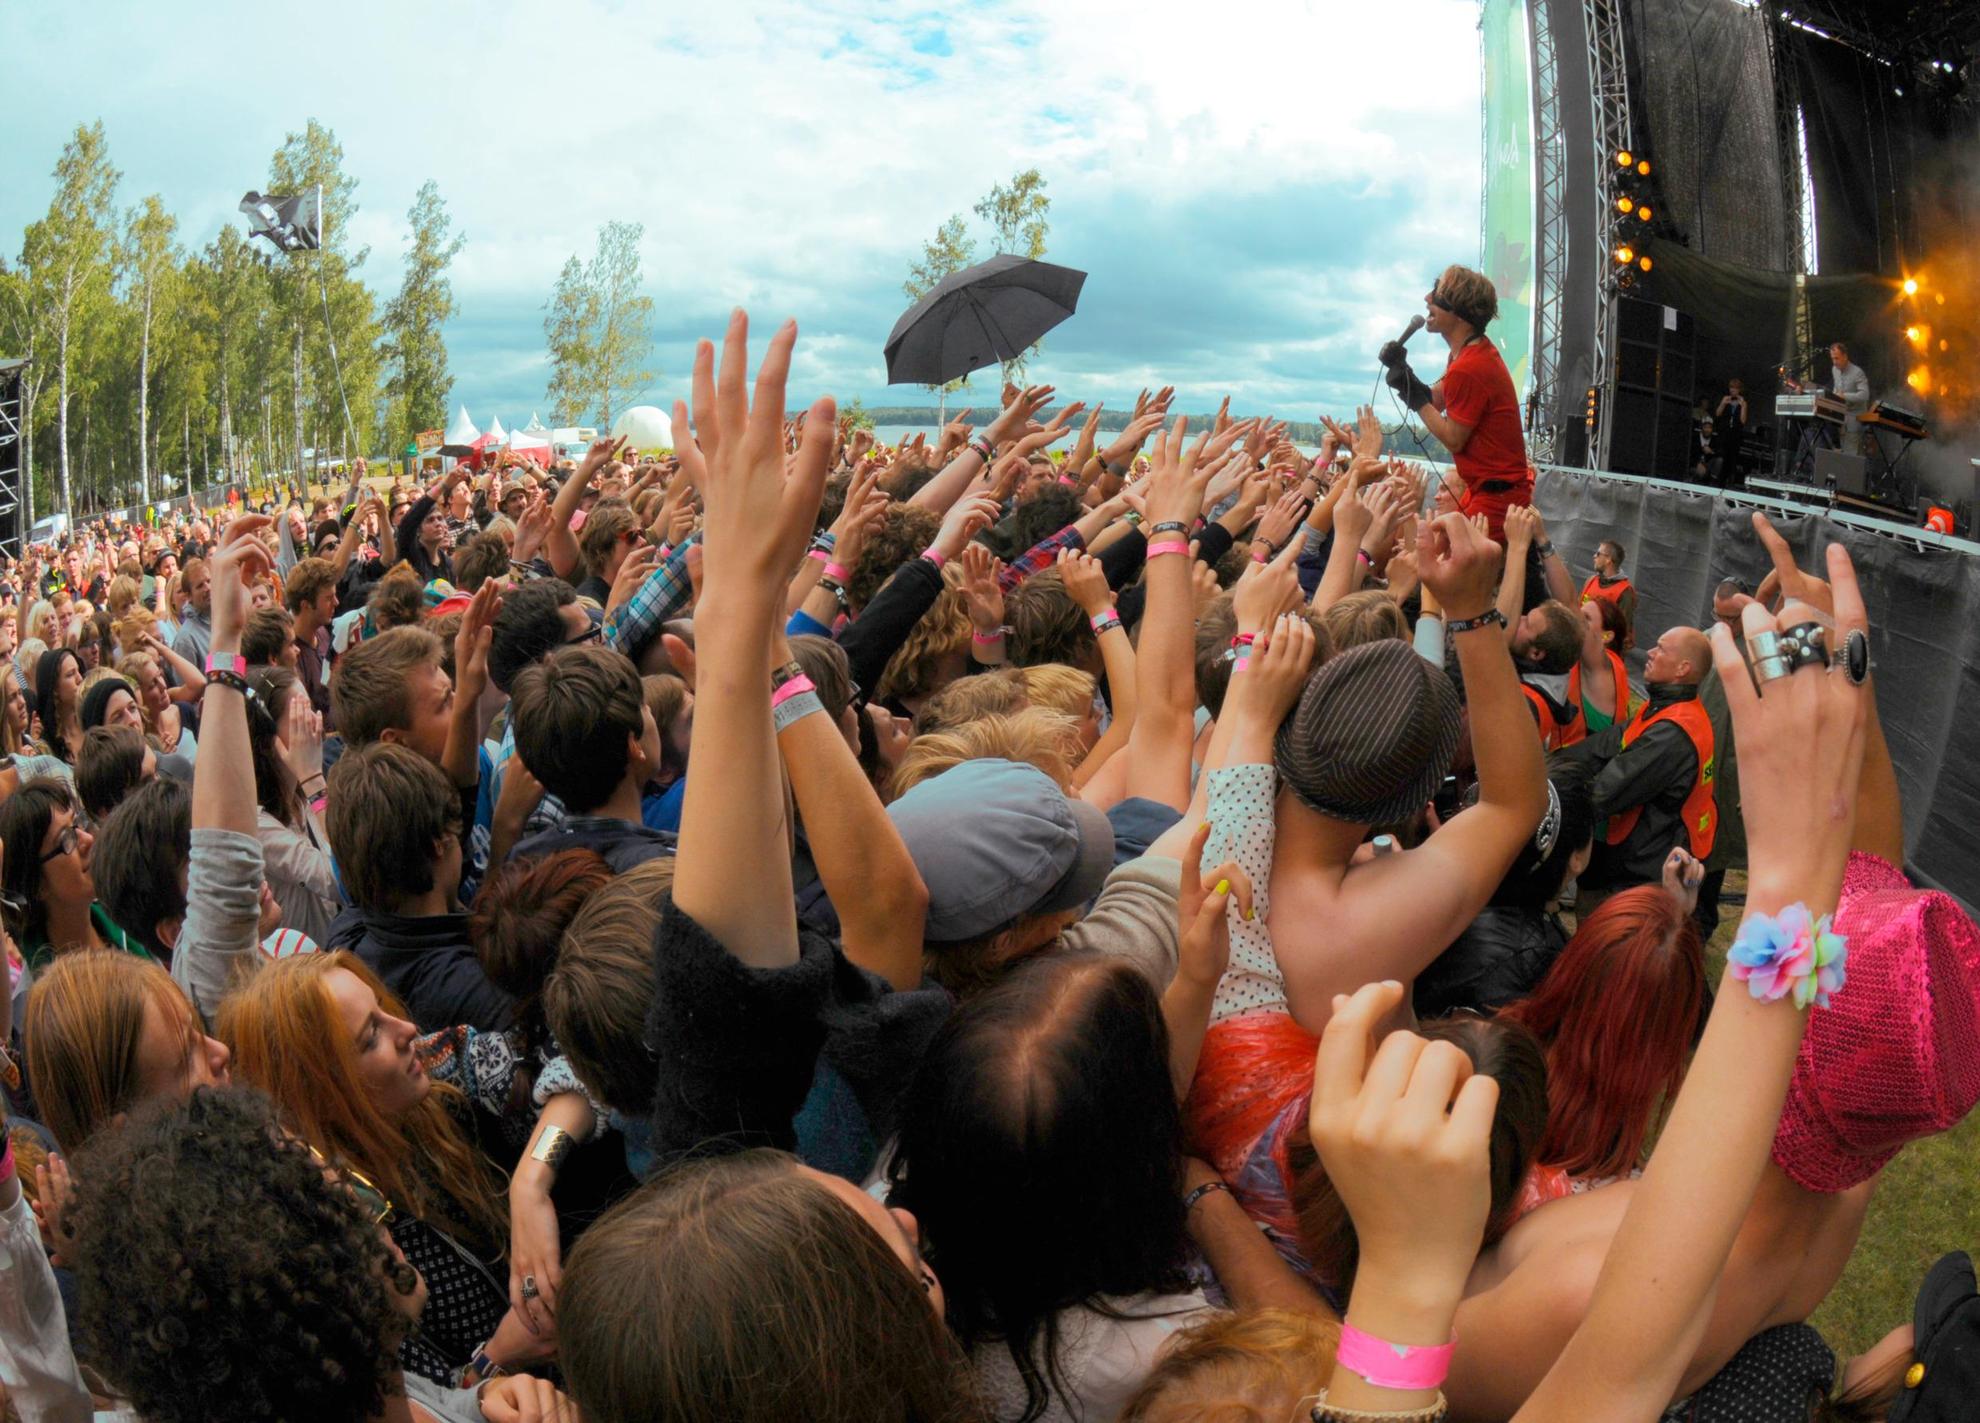 People in the audience raise their hands into the air during a Bob Hund concert at a Swedish festival.